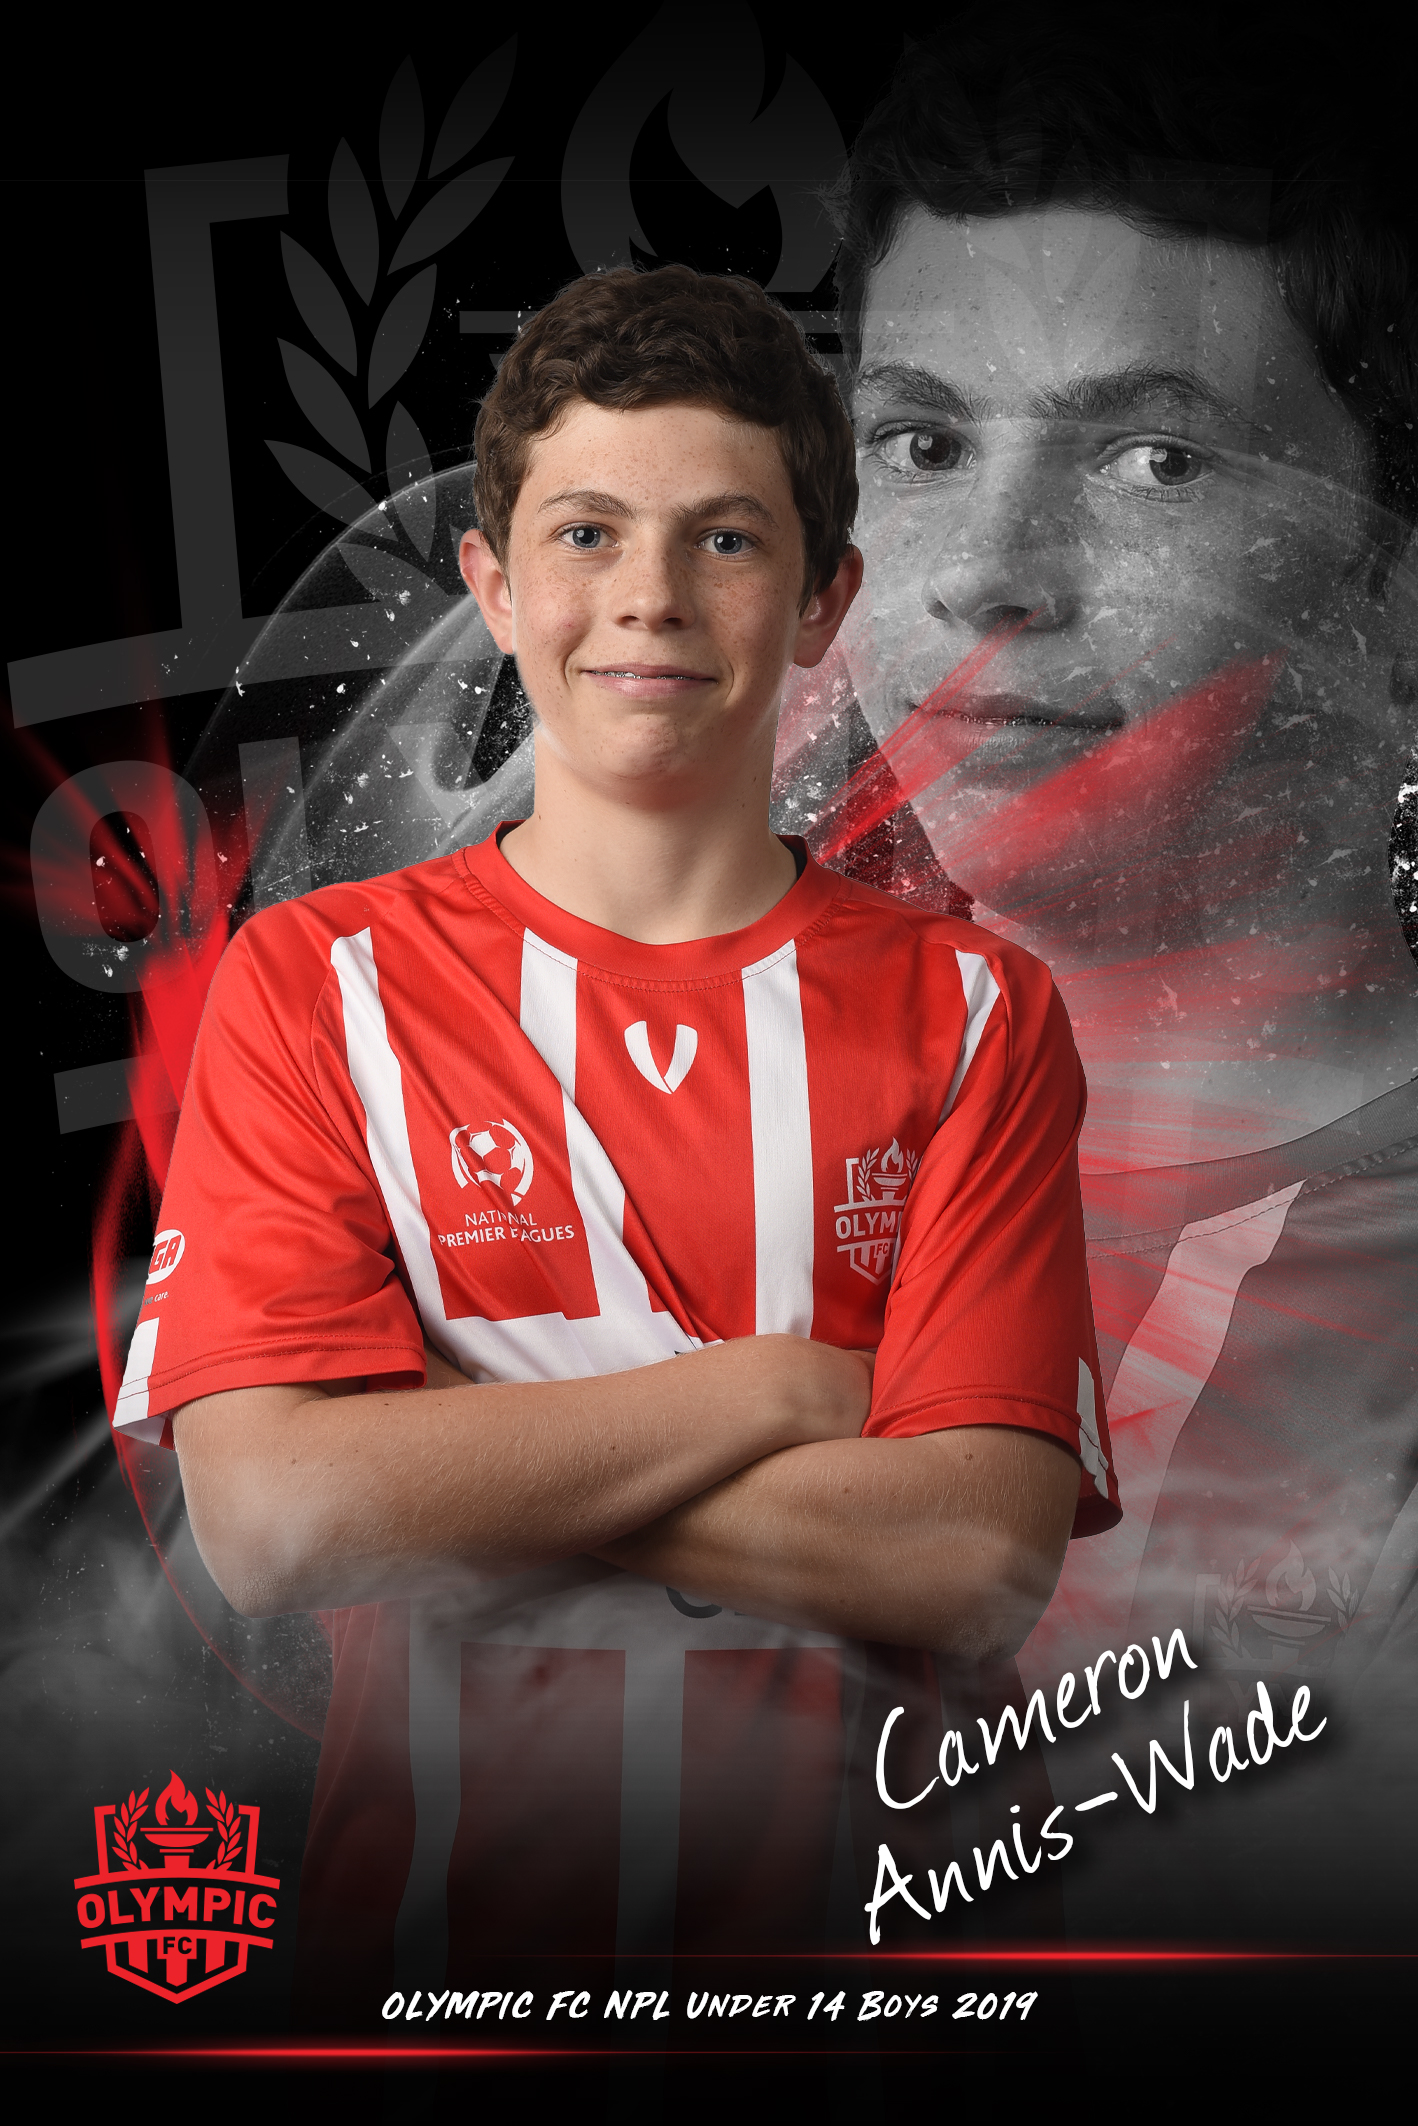 Cameron Annis-Wade Olympic FC Individual Portrait 2019